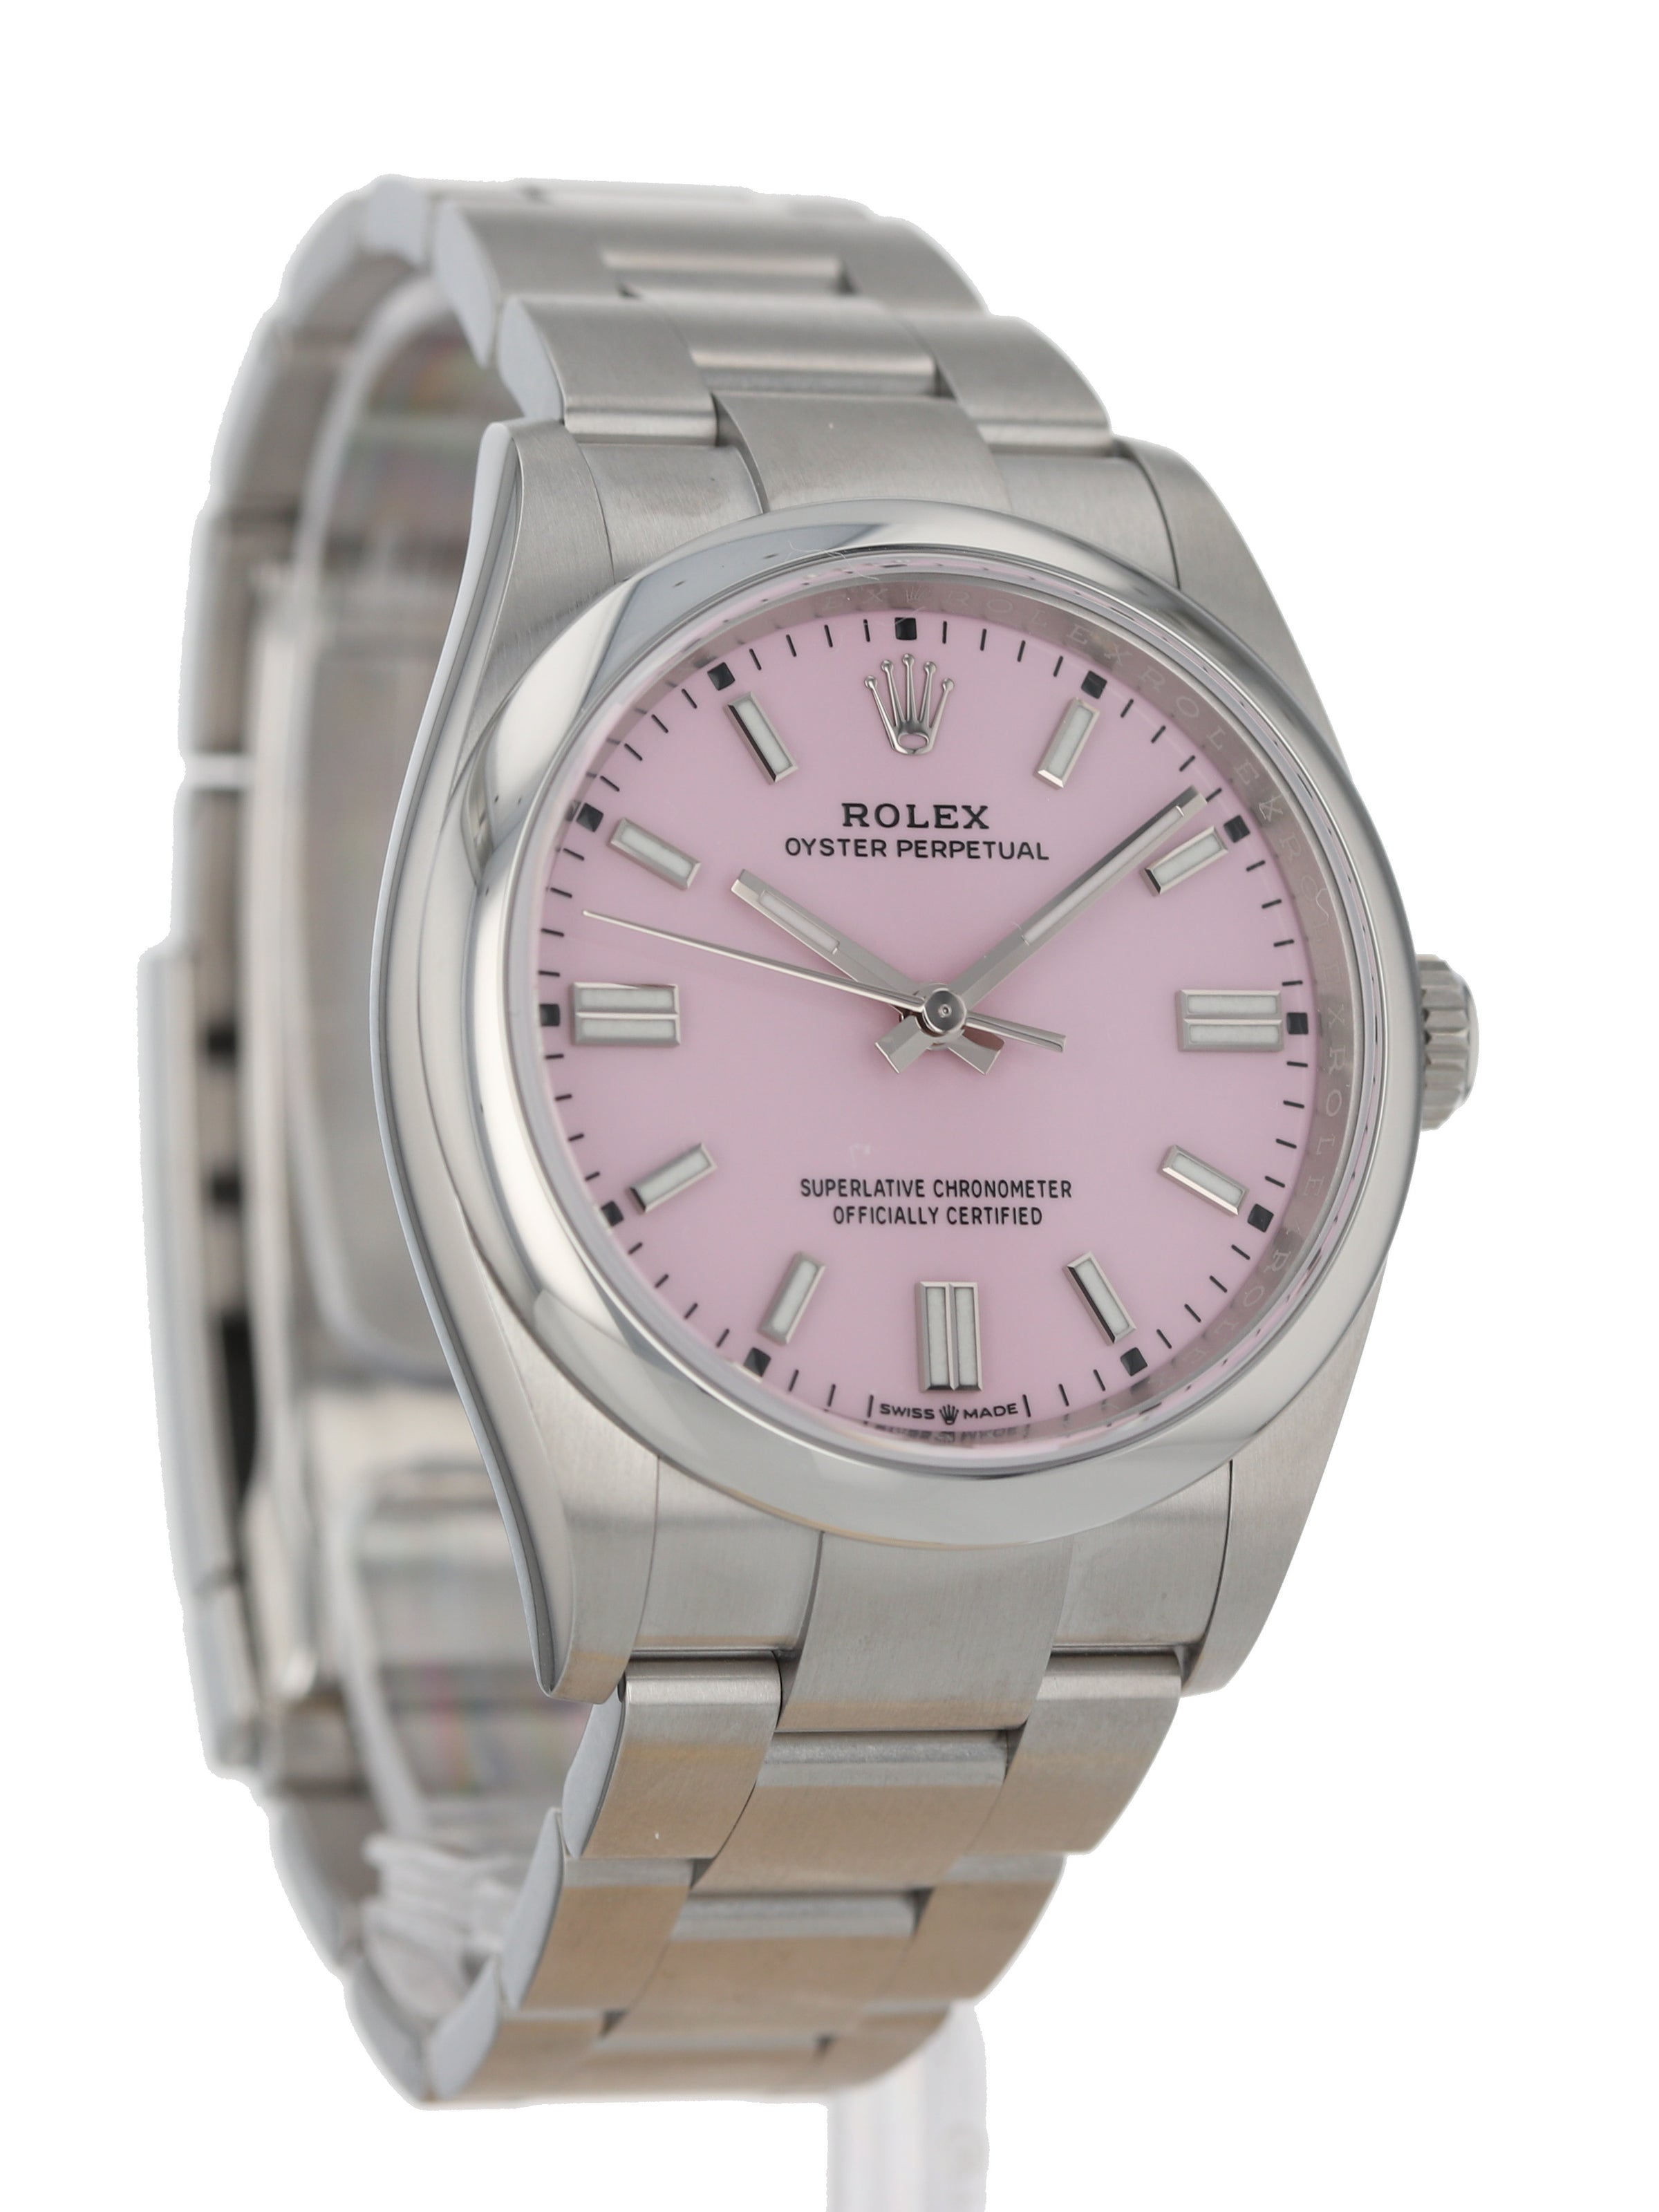 Elegant Rolex Oyster Perpetual 36 126000 - Timepiece Bank